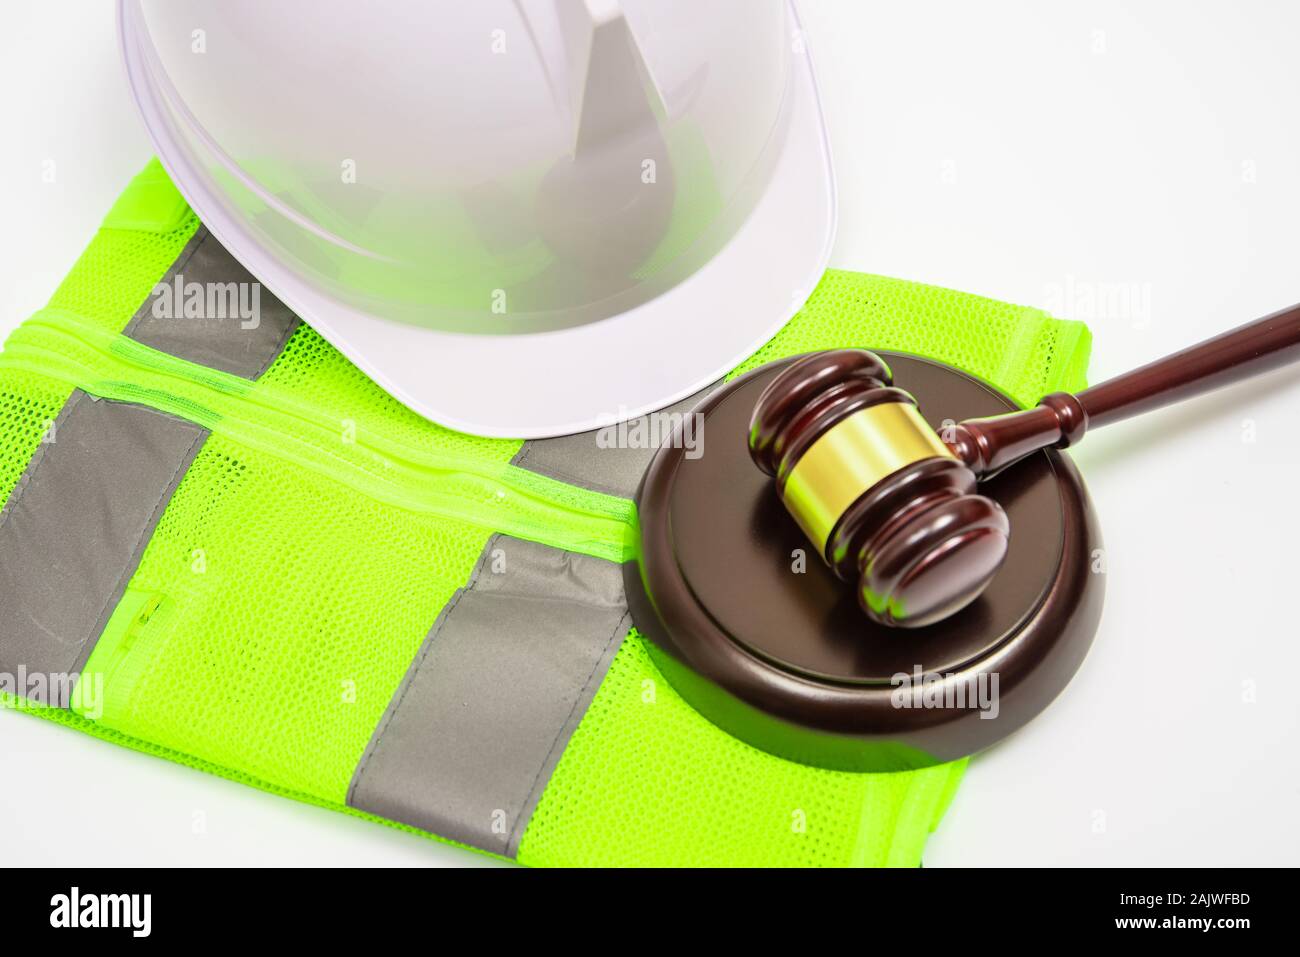 A labor-related legal concept with safety hats, work clothes, and a judge gavel on a white background. Stock Photo